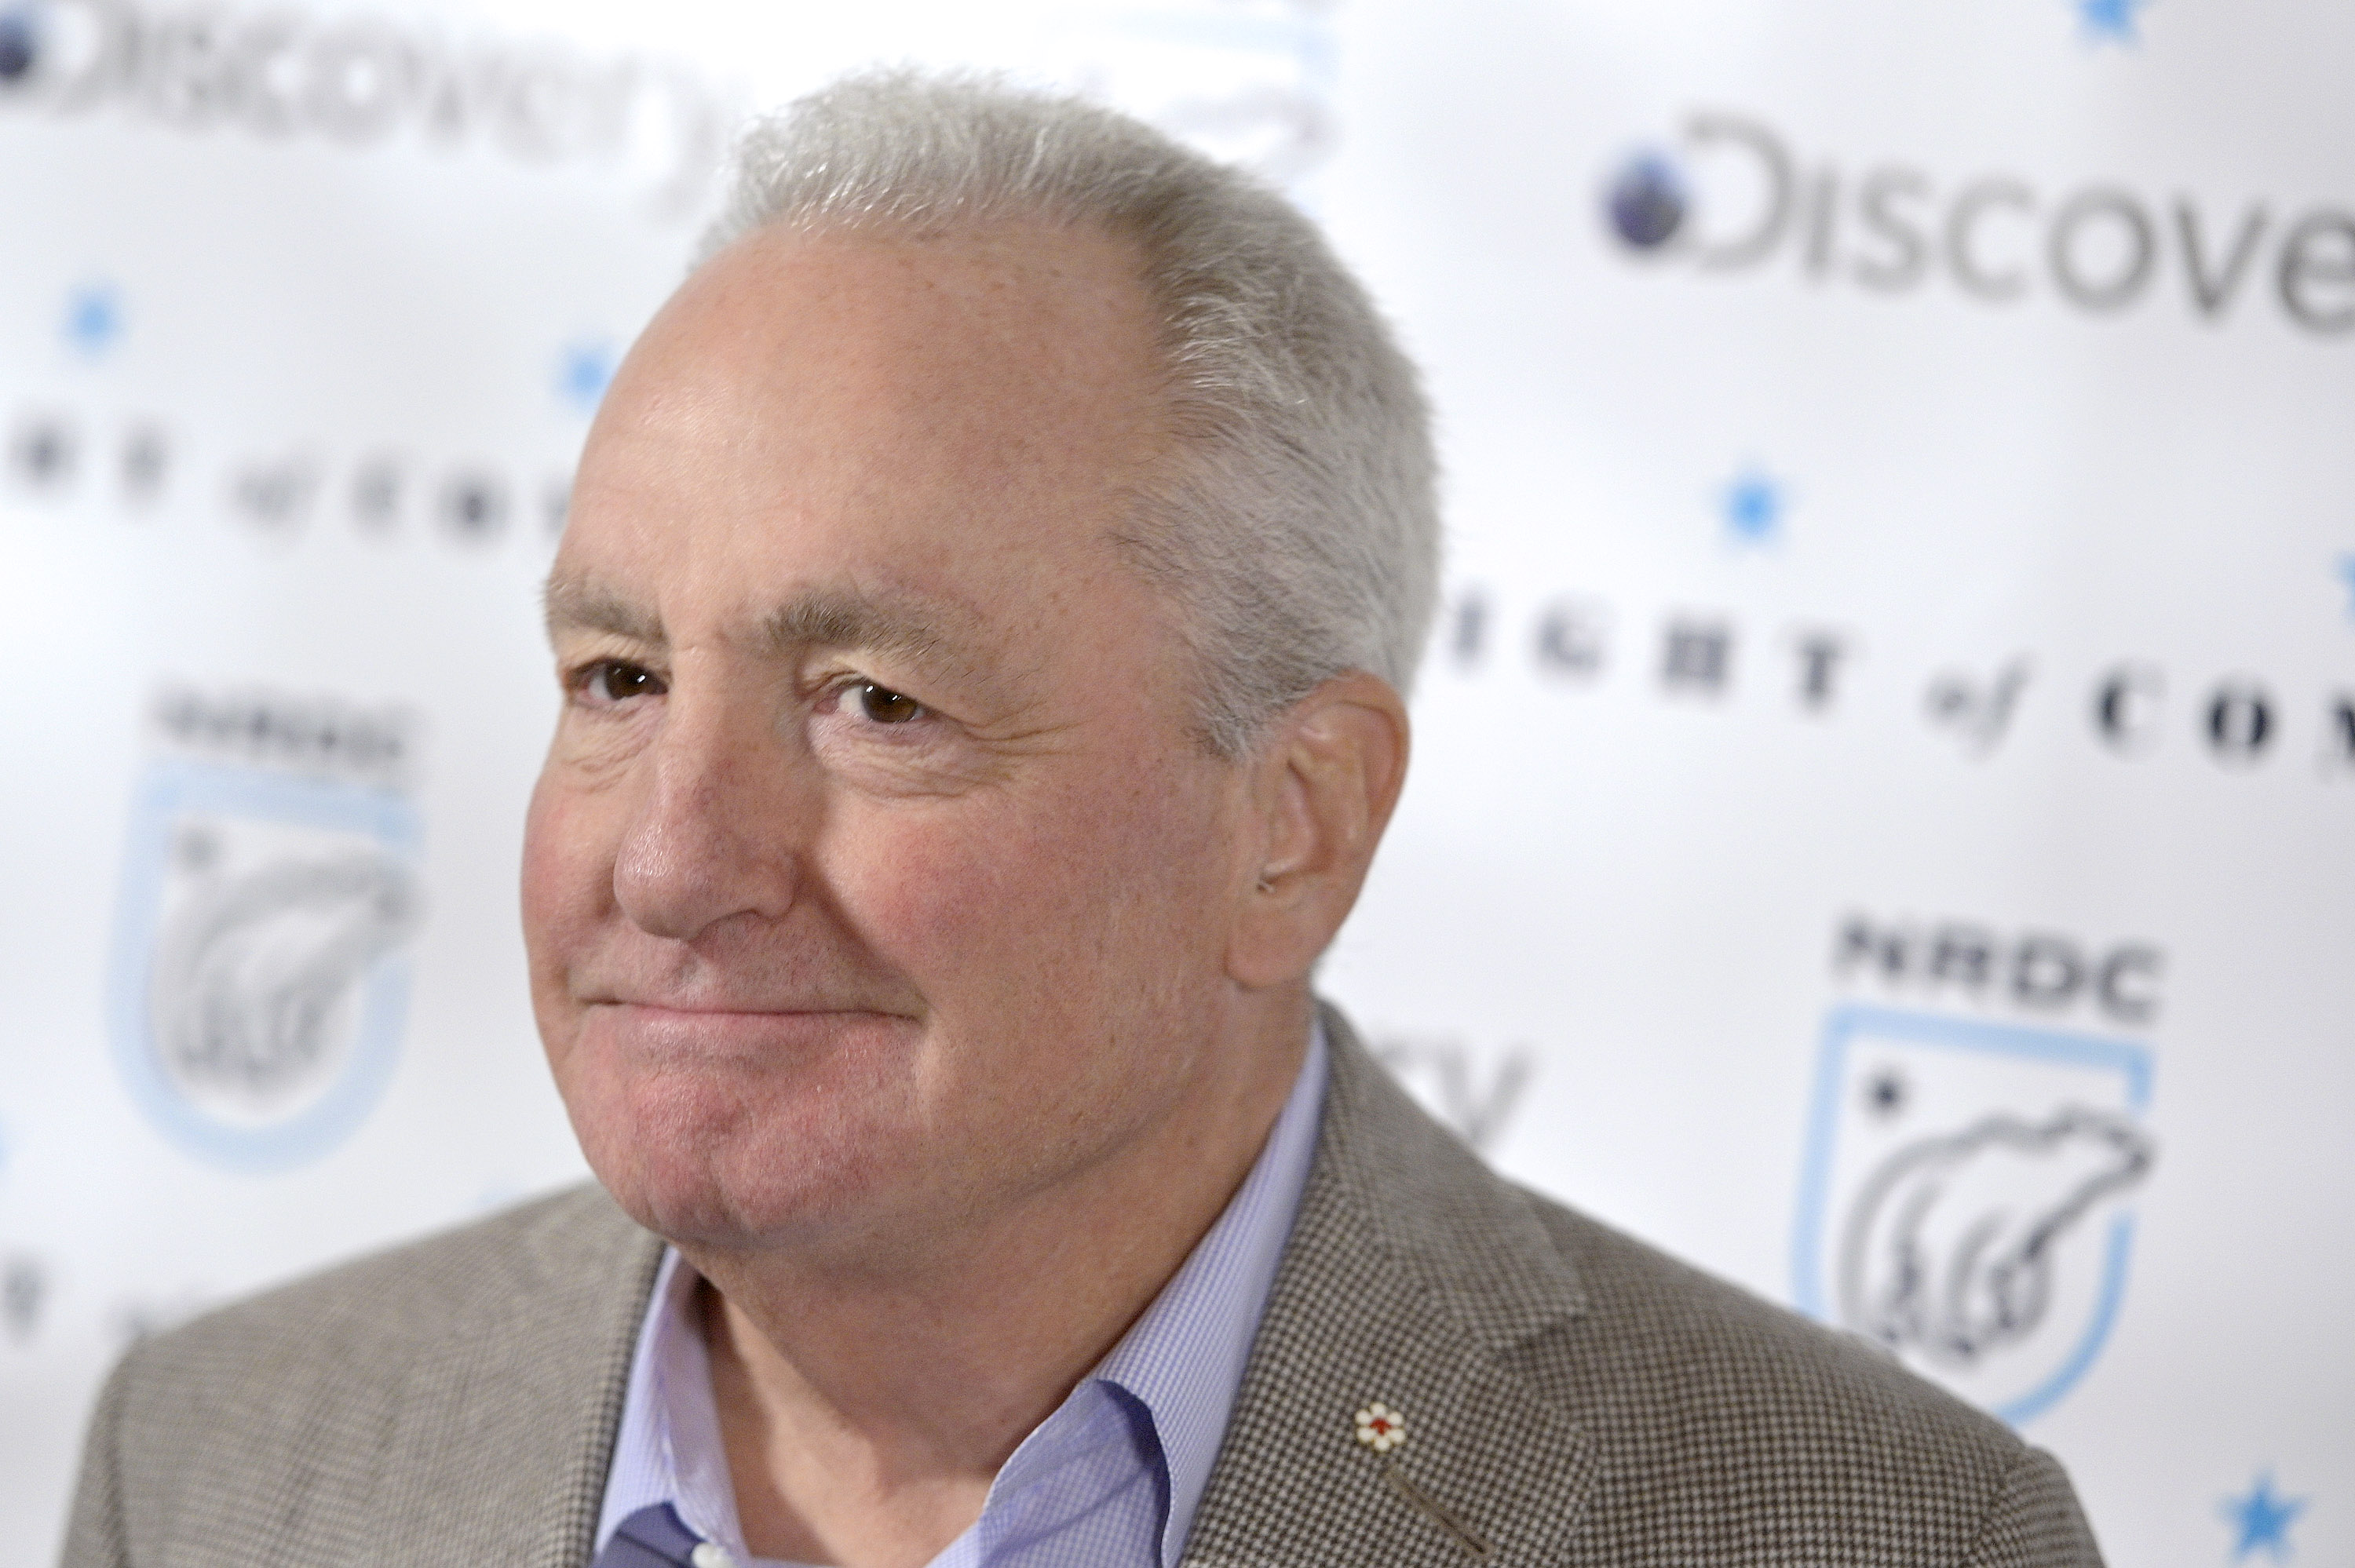 Lorne Michaels Reveals New ‘SNL' Musical Guest After Morgan Wallen Is Dropped